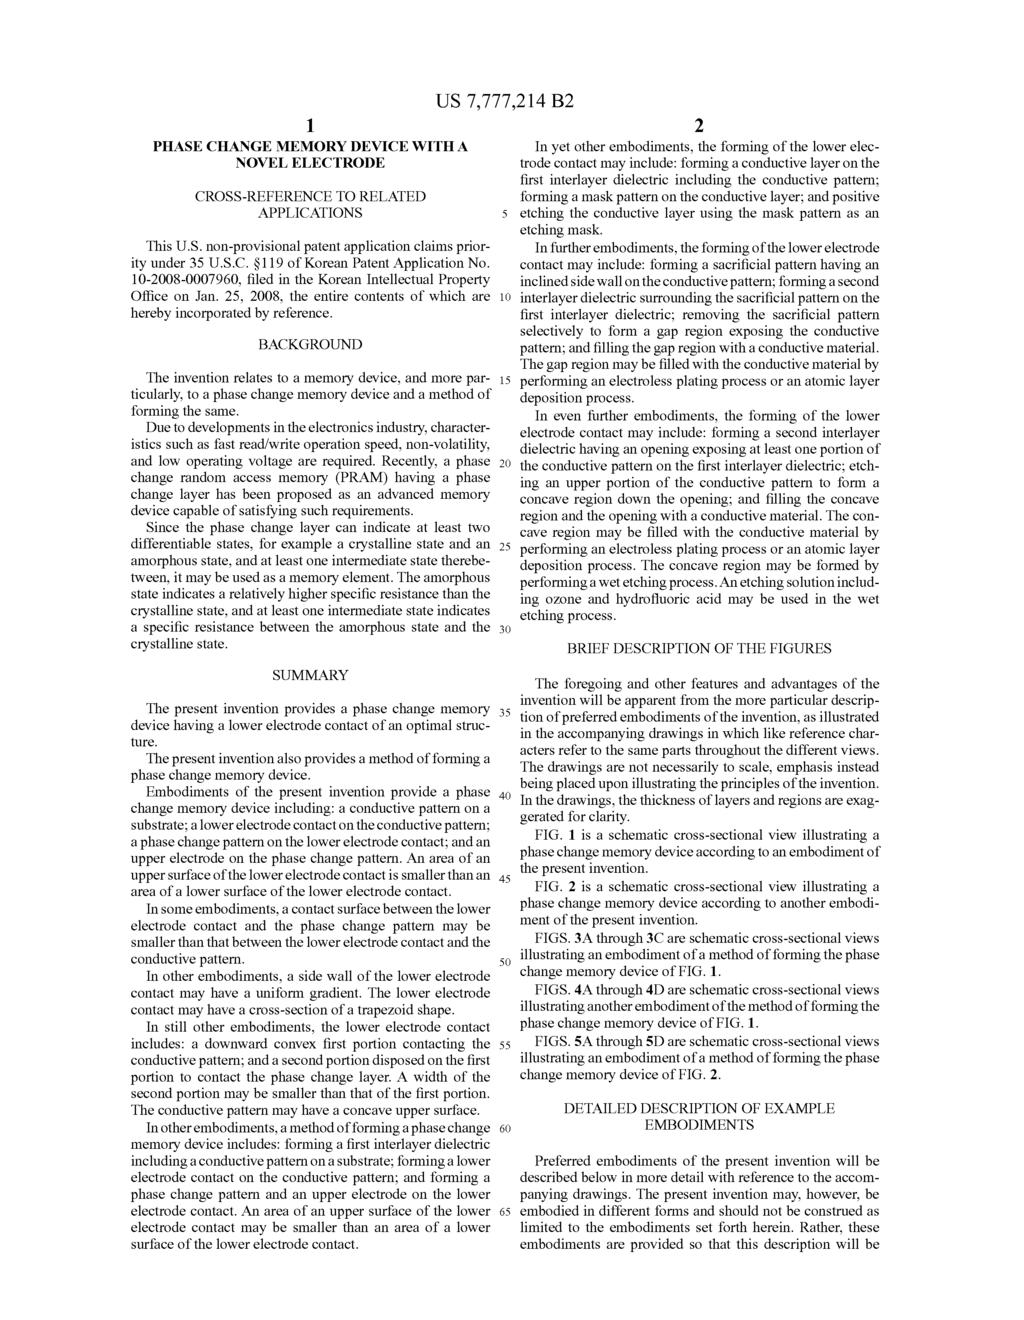 1. PHASE CHANGE MEMORY DEVICE WITH A NOVEL ELECTRODE CROSS-REFERENCE TO RELATED APPLICATIONS This U.S. non-provisional patent application claims prior ity under 35 U.S.C. S 119 of Korean Patent Application No.